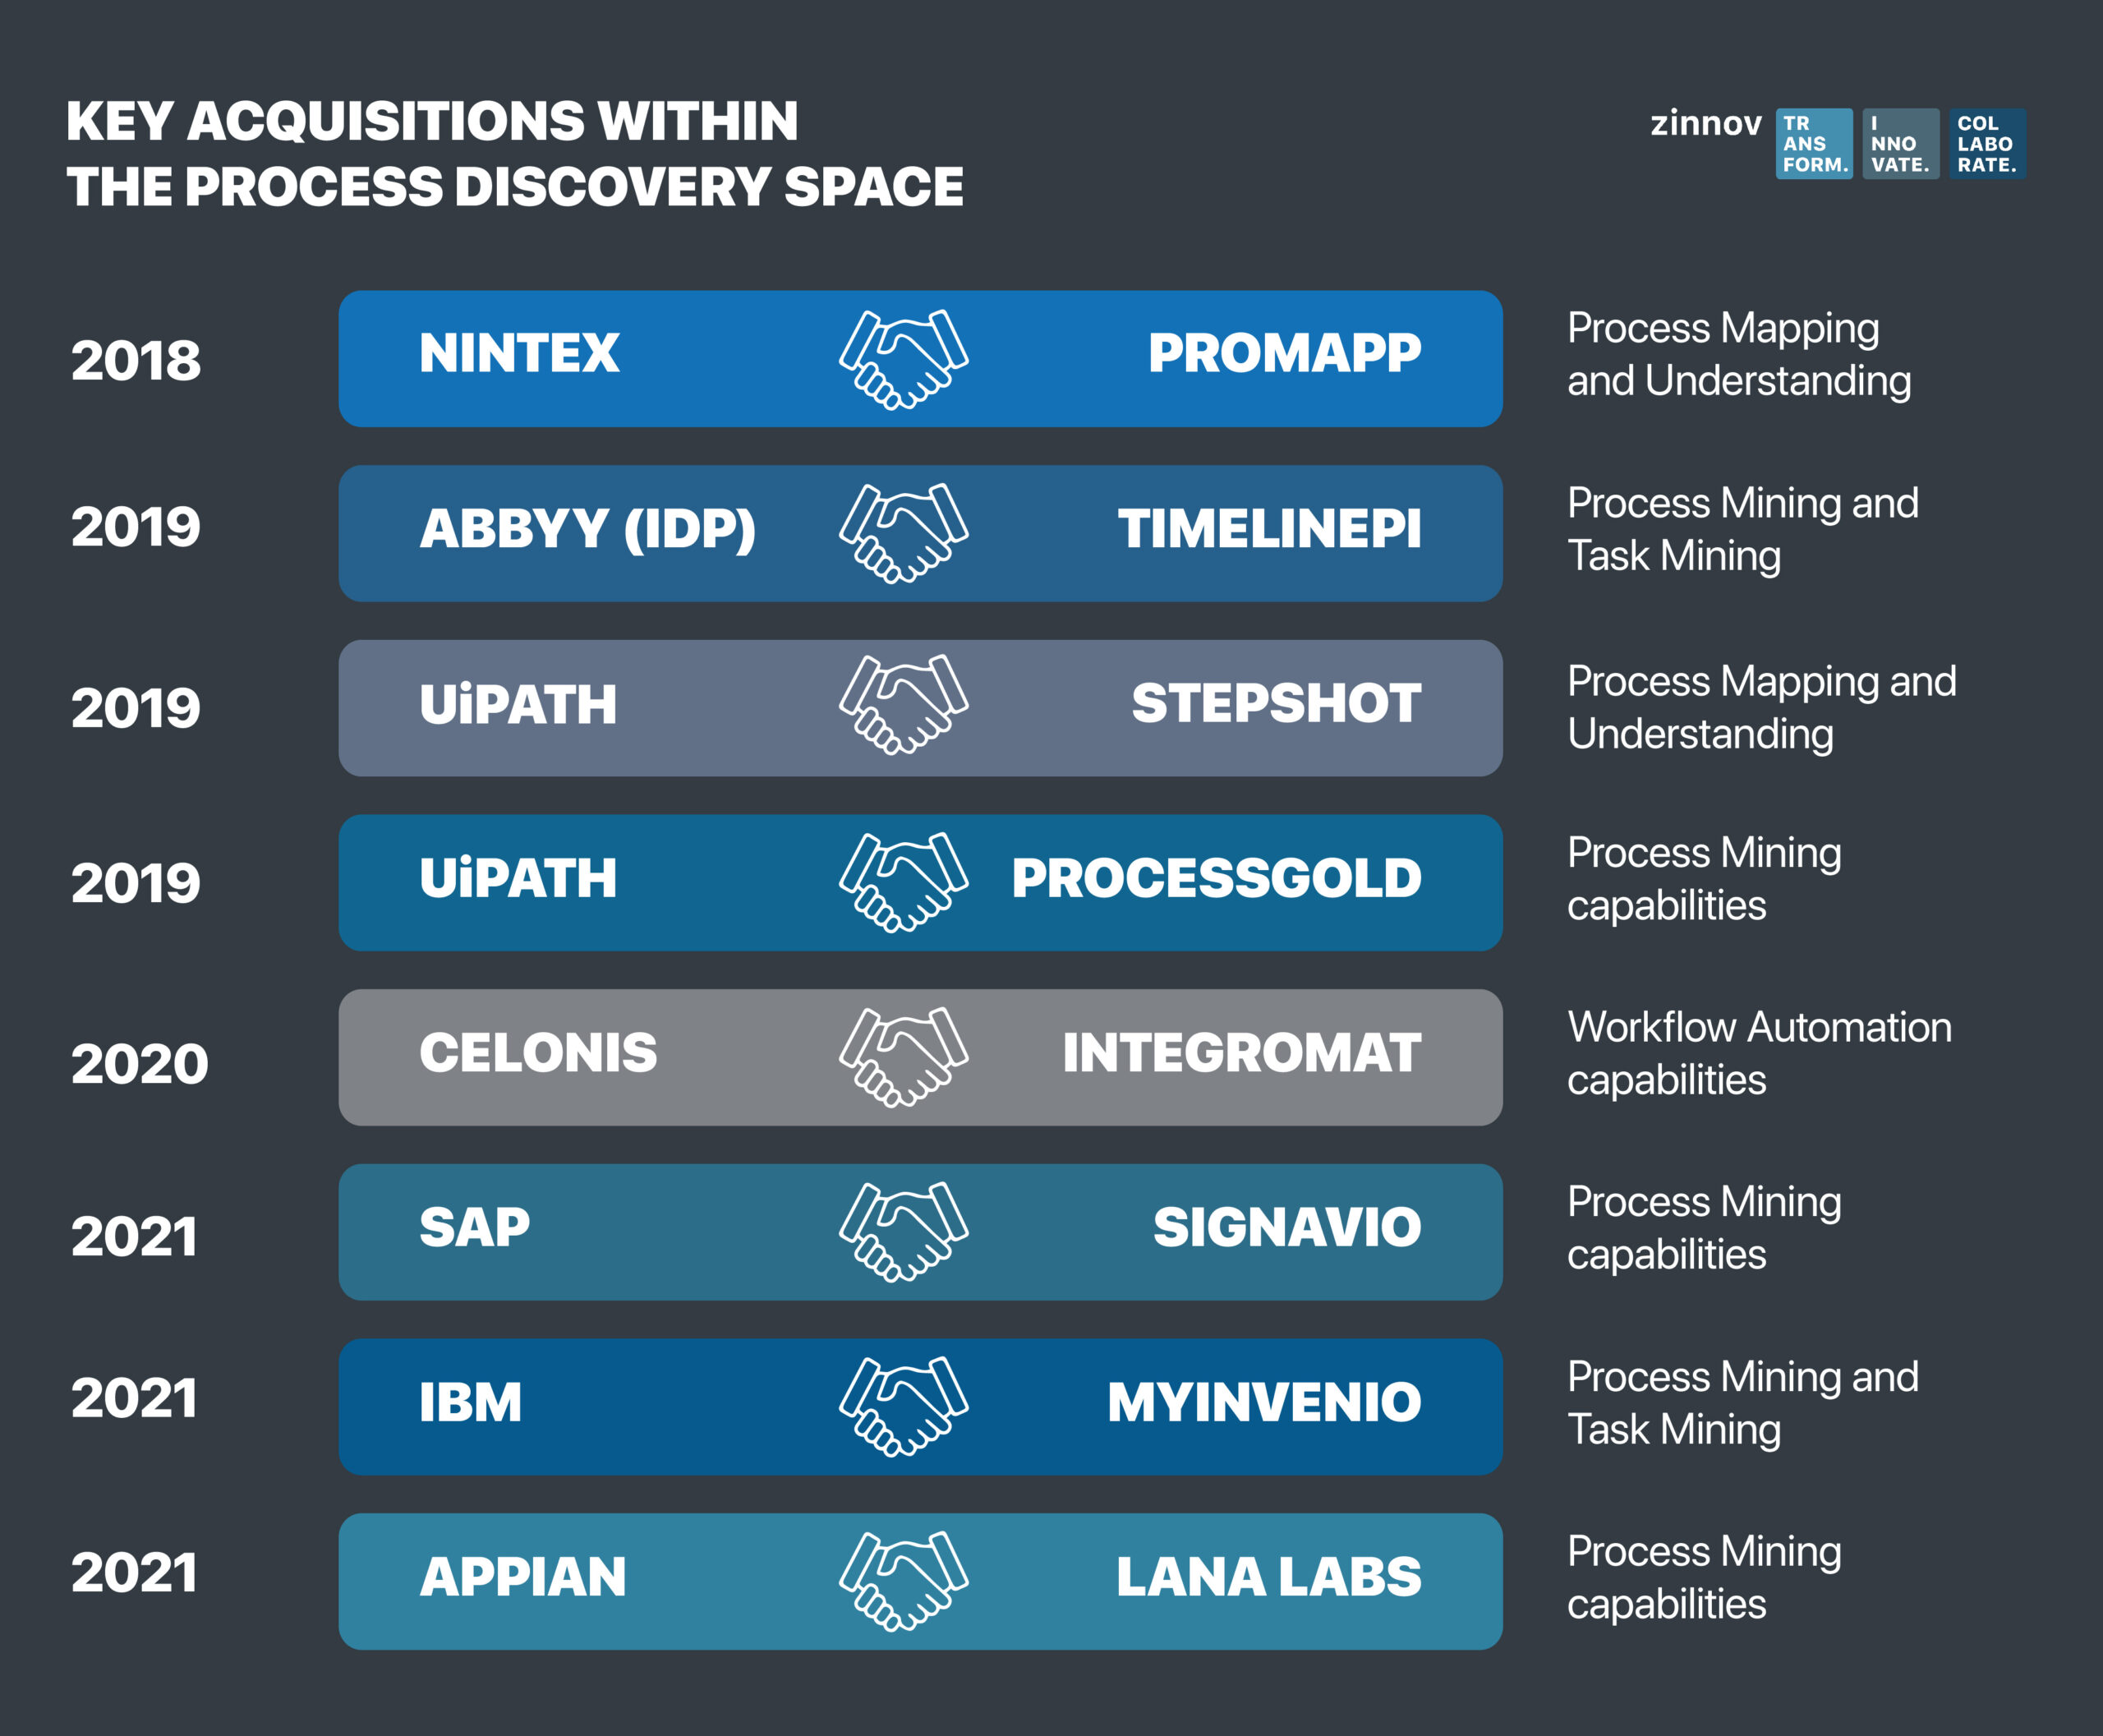 Key Acquisitions within the process discovery space